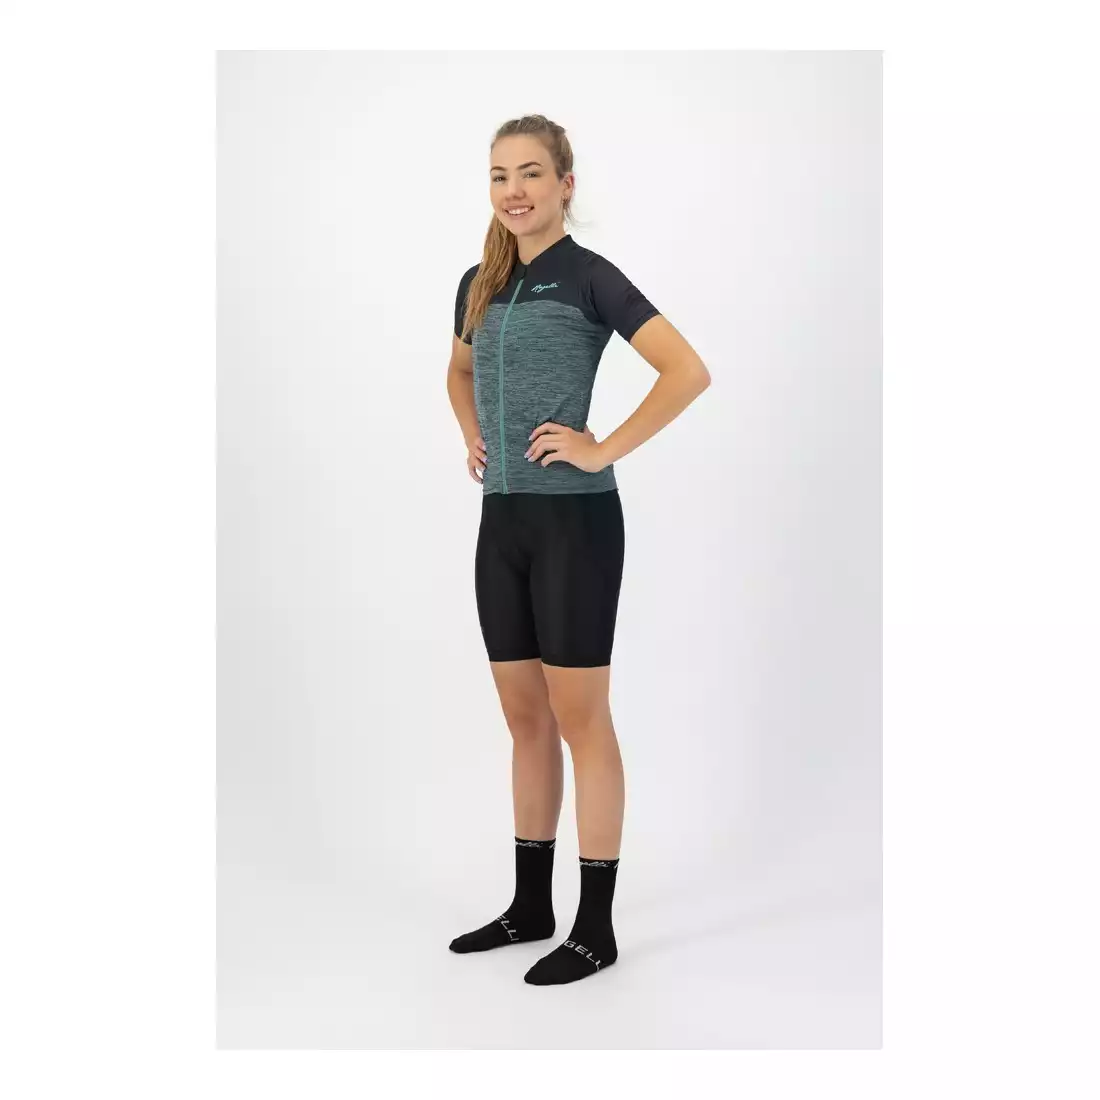 Rogelli MELANGE women's cycling jersey, navy blue and turquoise